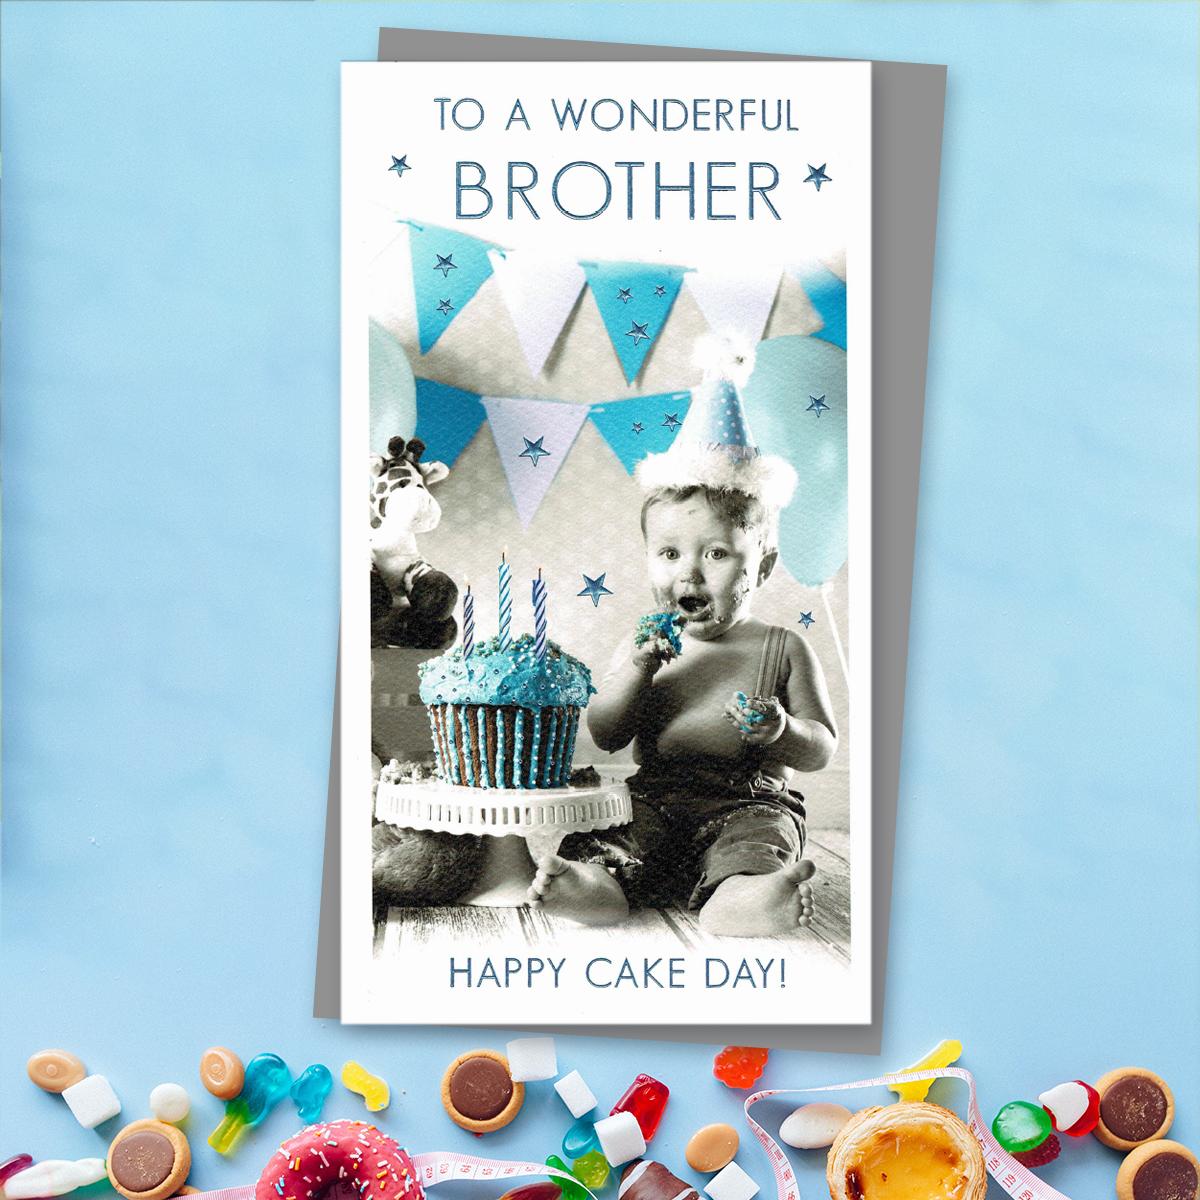 Wonderful Brother Happy Cake Day! Front Image